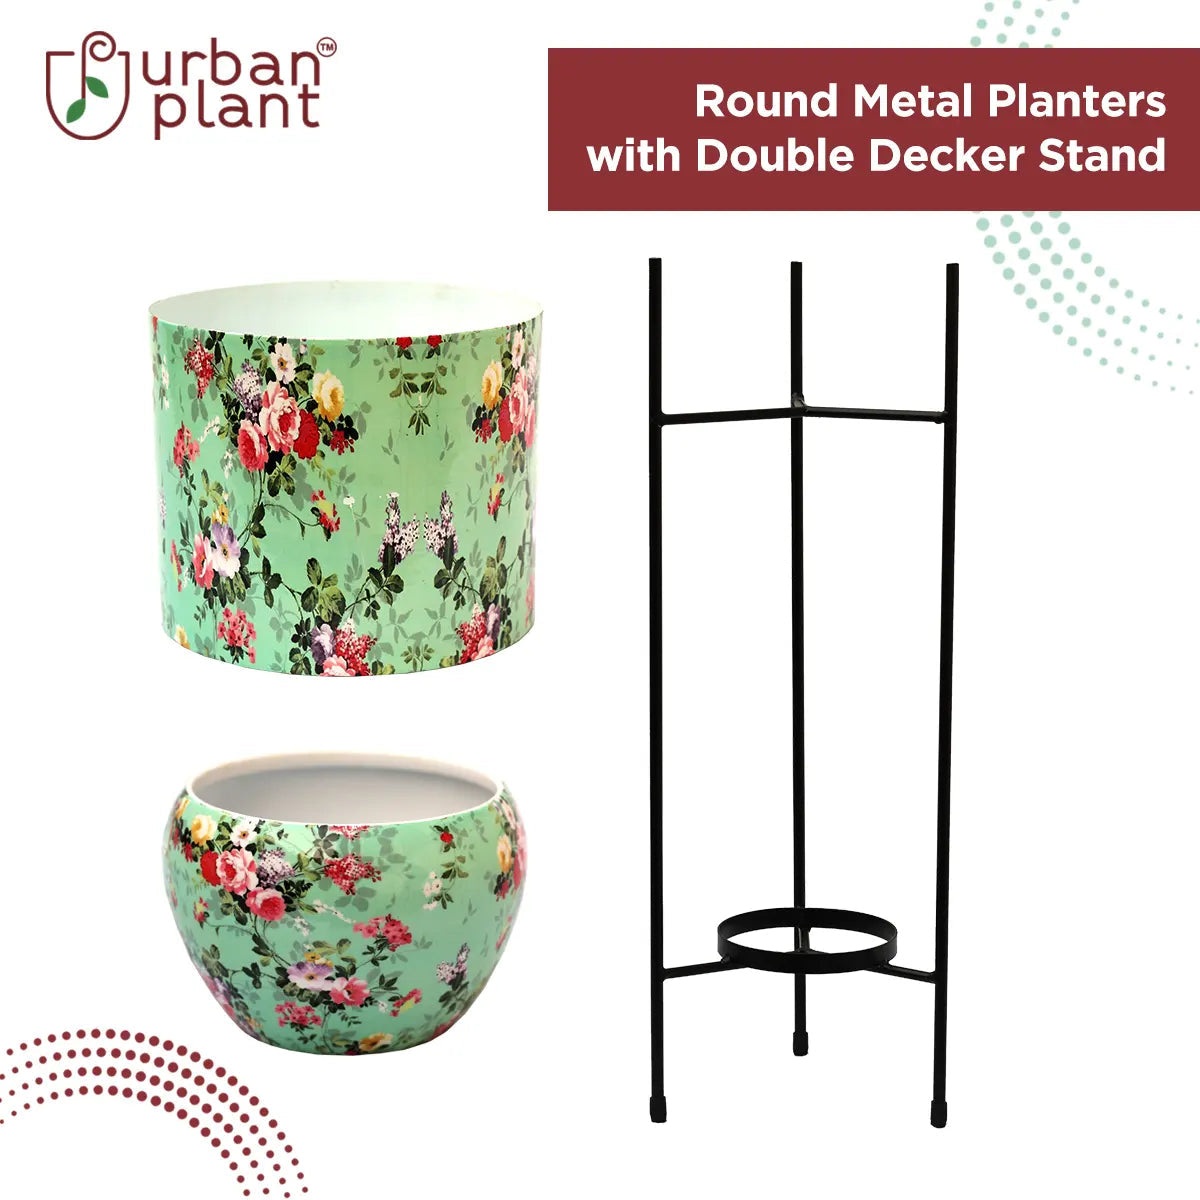 Round Metal Planters/Pots for Indoor Plants with Double Decker Stand Metal Planter Urban Plant 